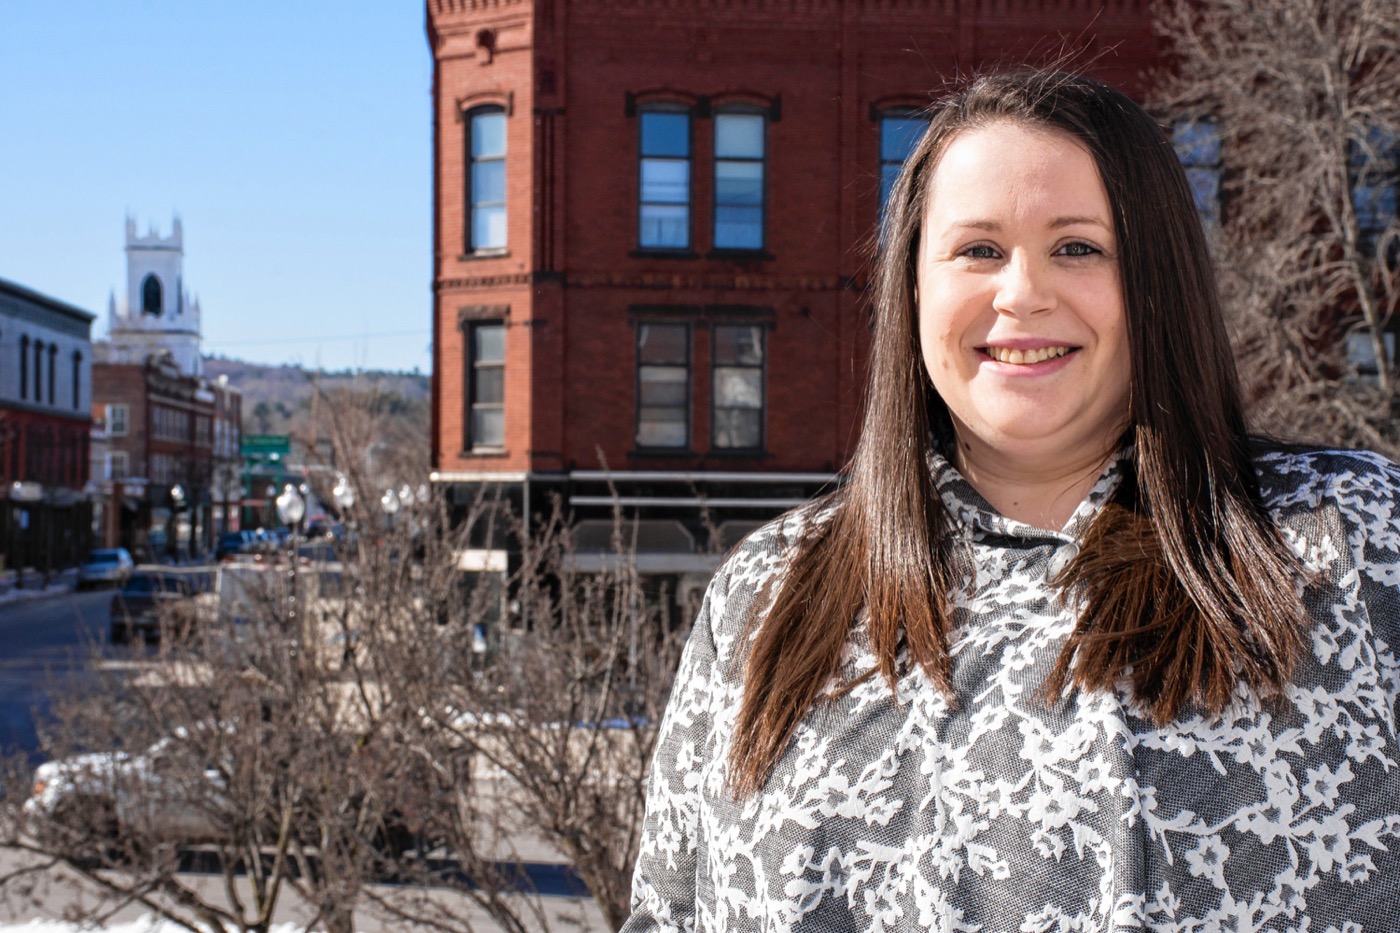 : CLAREMONT’S LEADING LADYElyse Crossman, the executive director of the Greater Claremont Chamber of Commerce, on the balcony outside of her office overlooking the city’s Opera House Square.